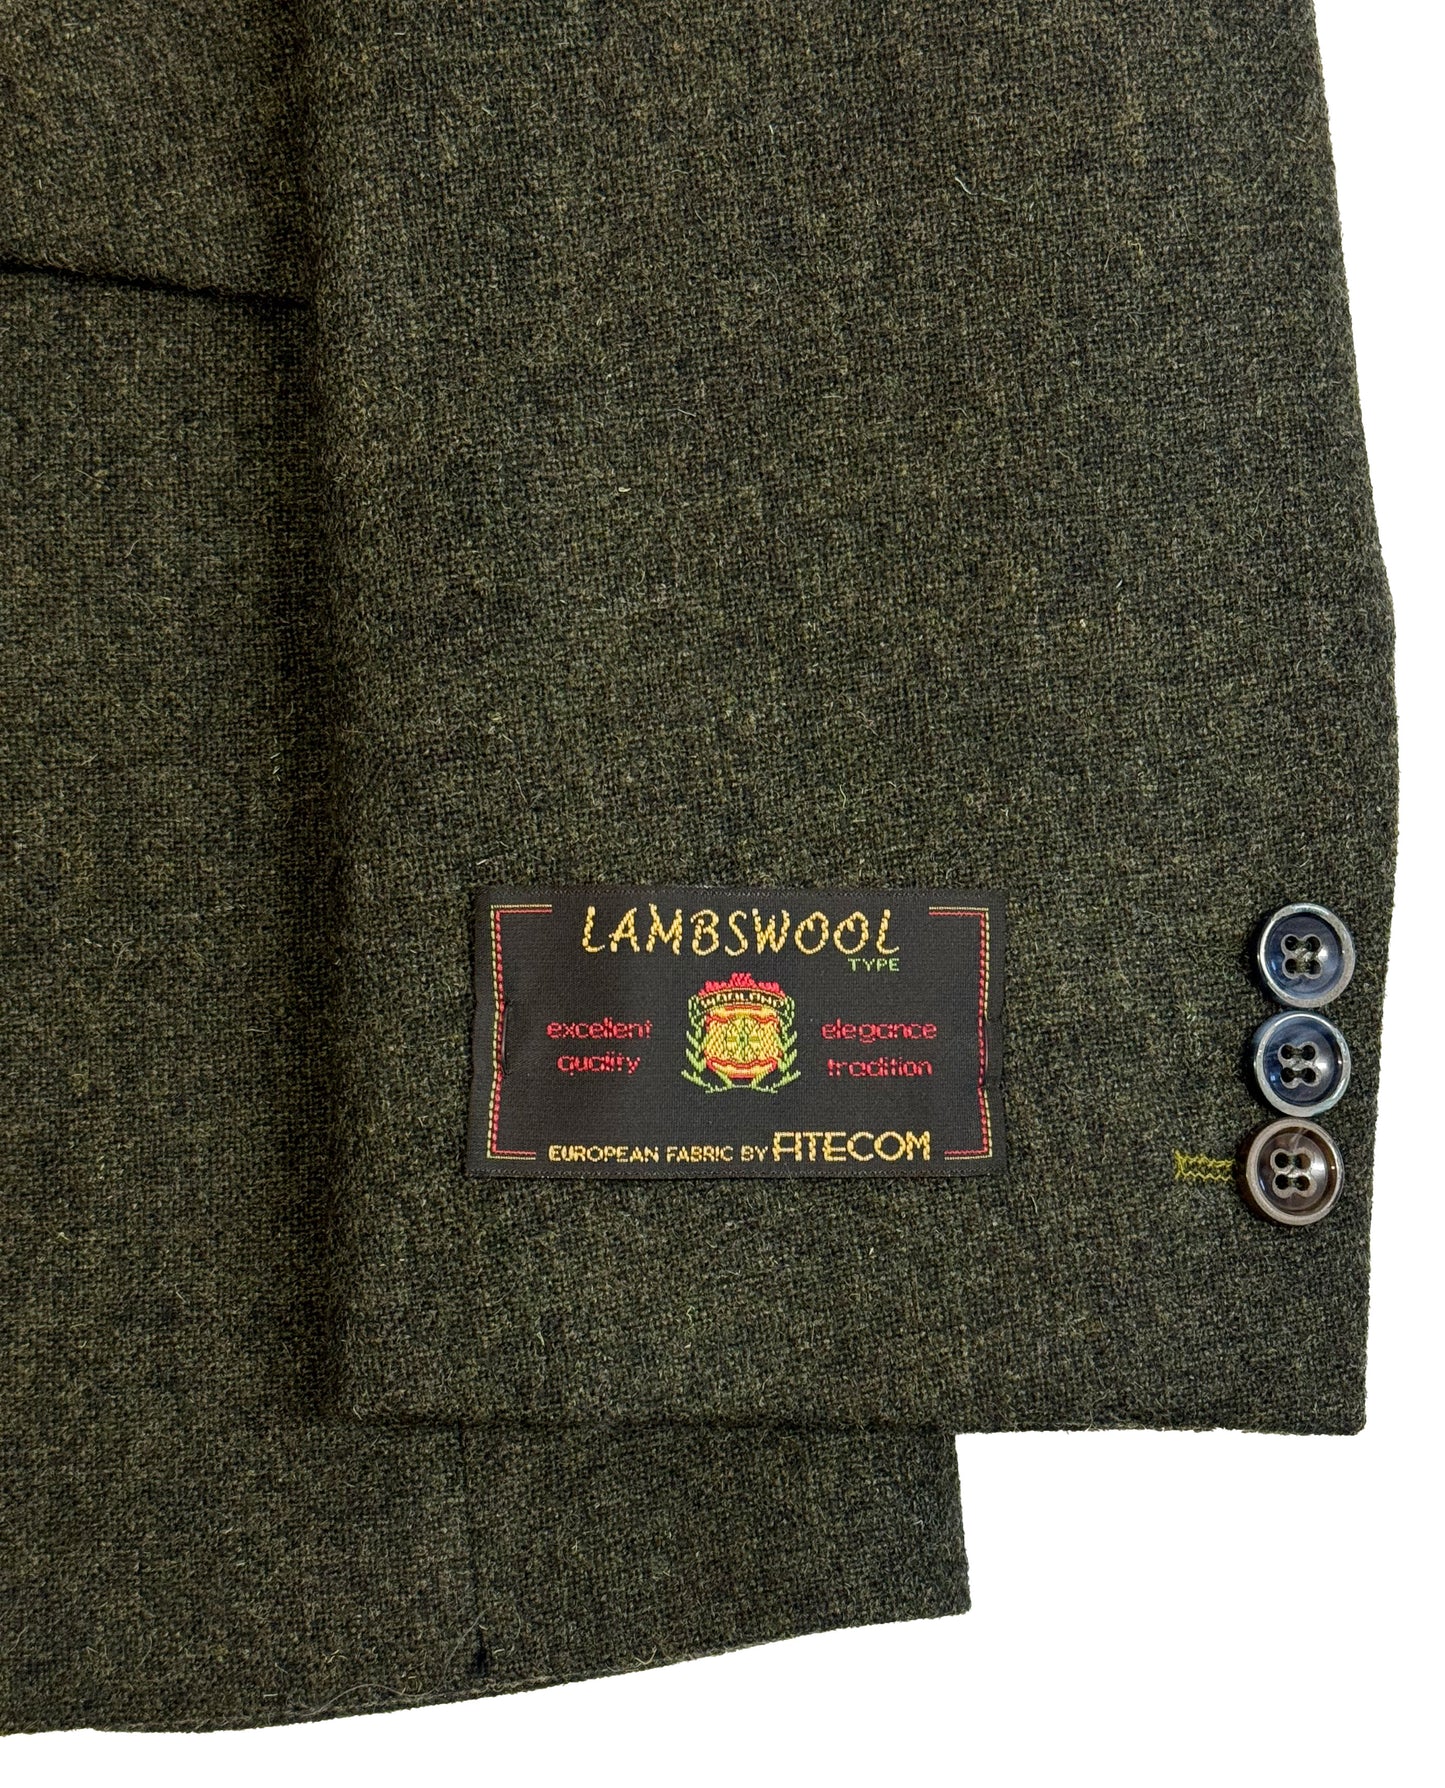 Men's Wool Green Tweed Jacket with Floral Lining